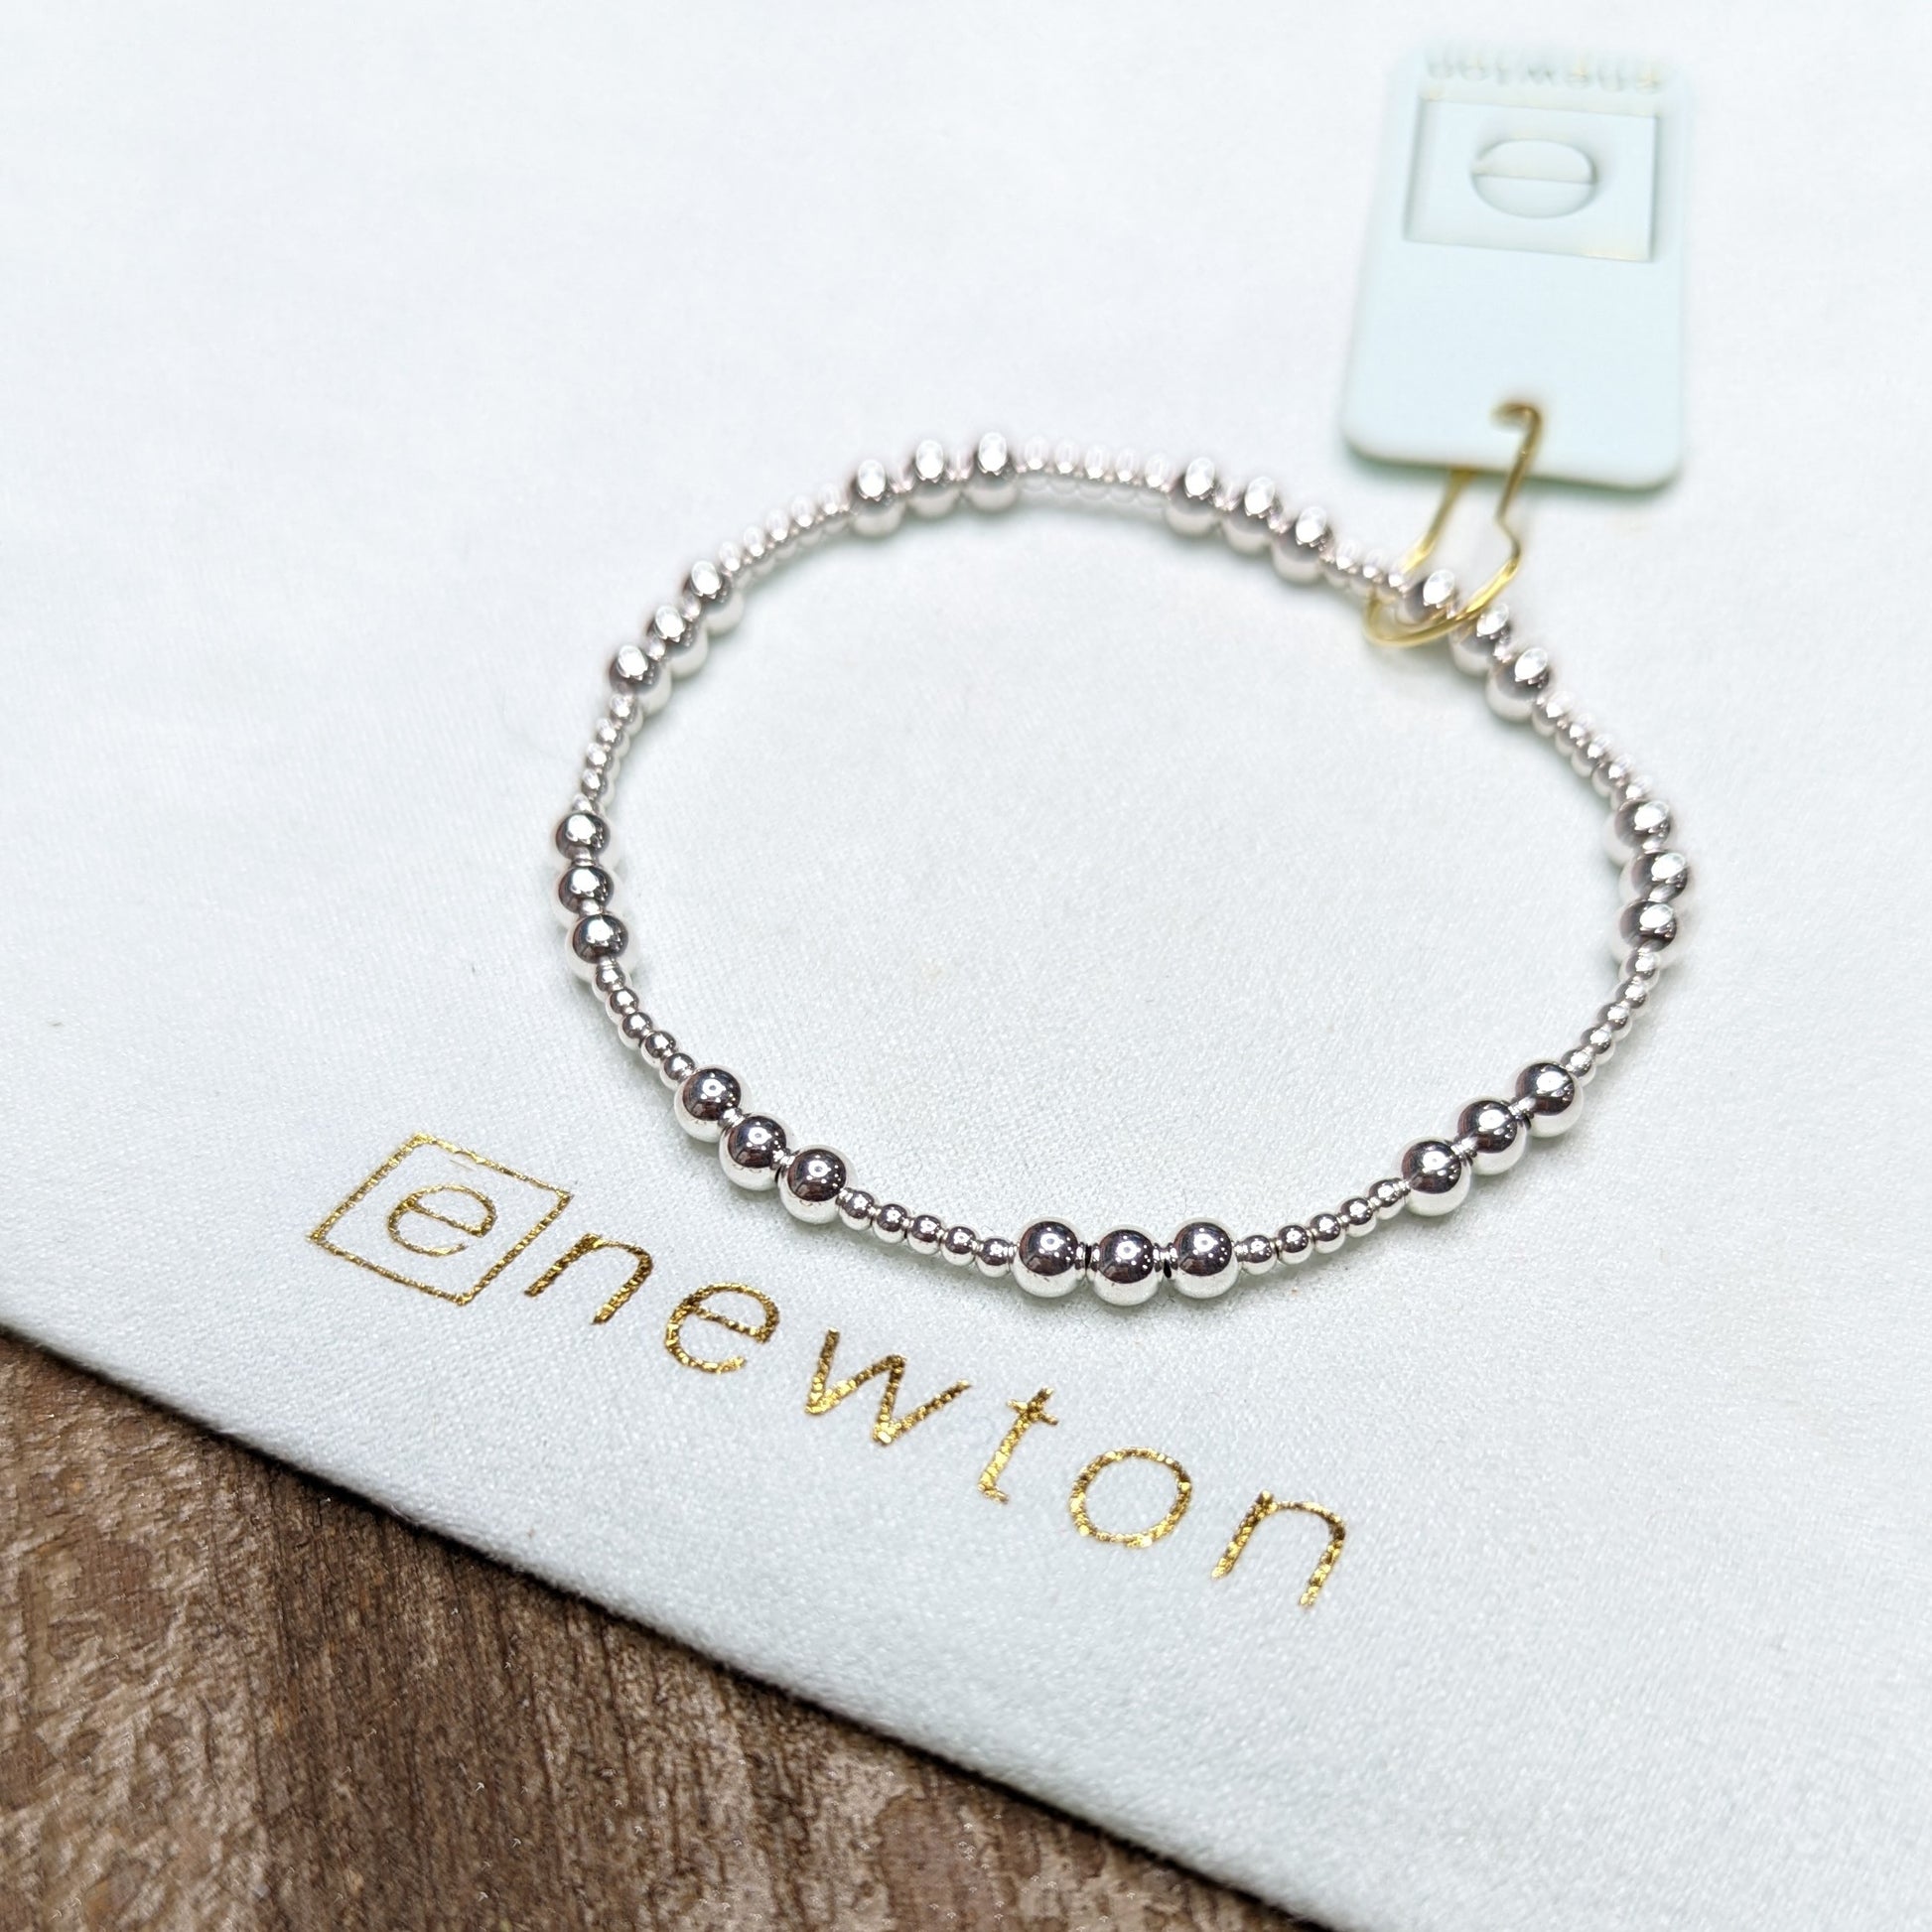 Classic sterling silver 4mm Joy bracelet by eNewton. By The Painted Cottage in Edgewater, MD